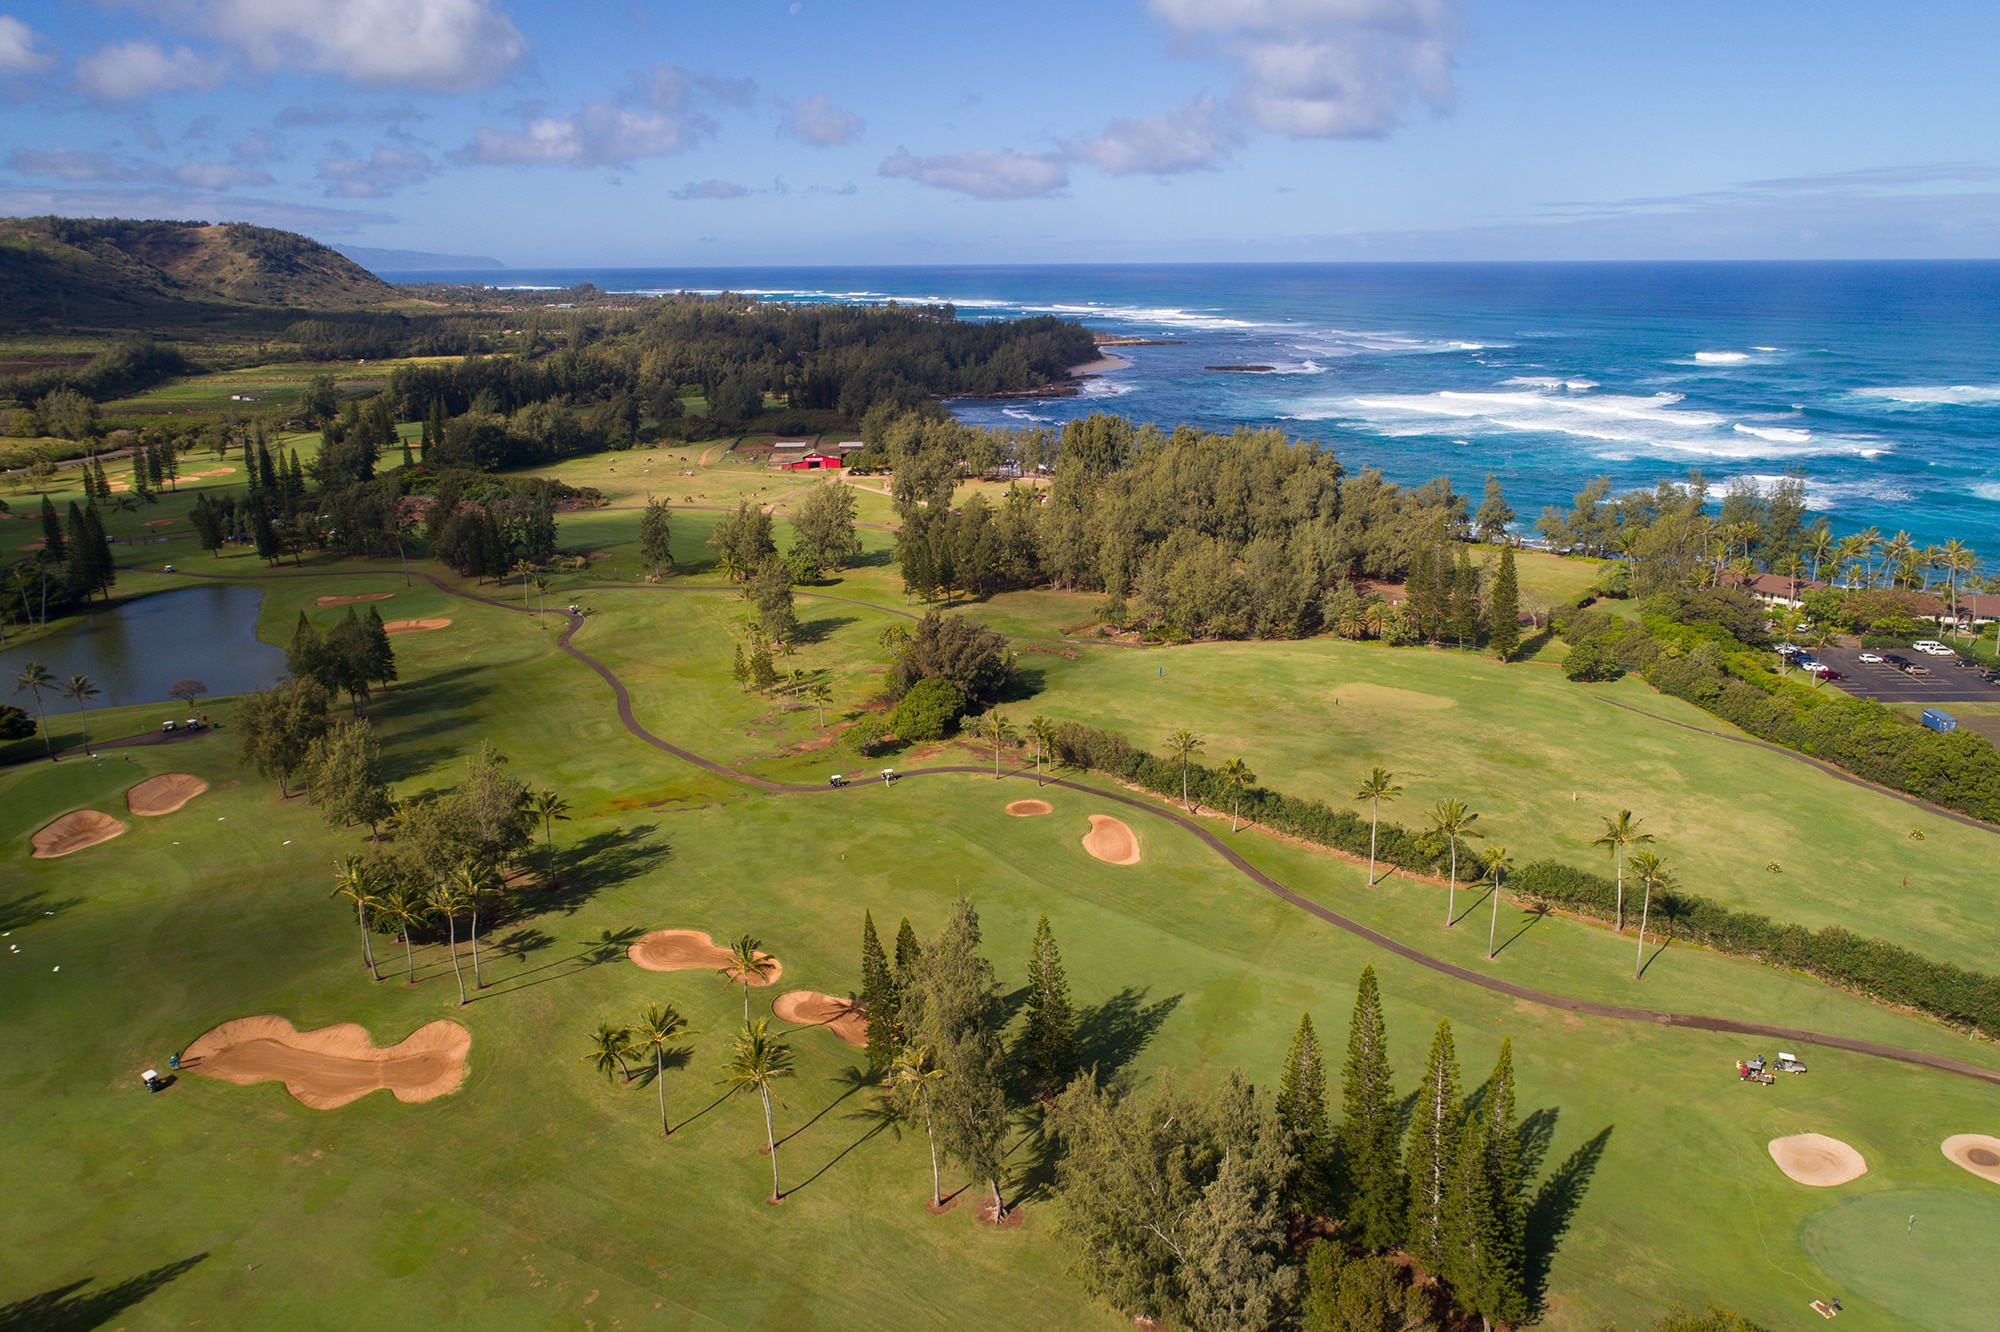 Best things to do in Oahu - Golfing